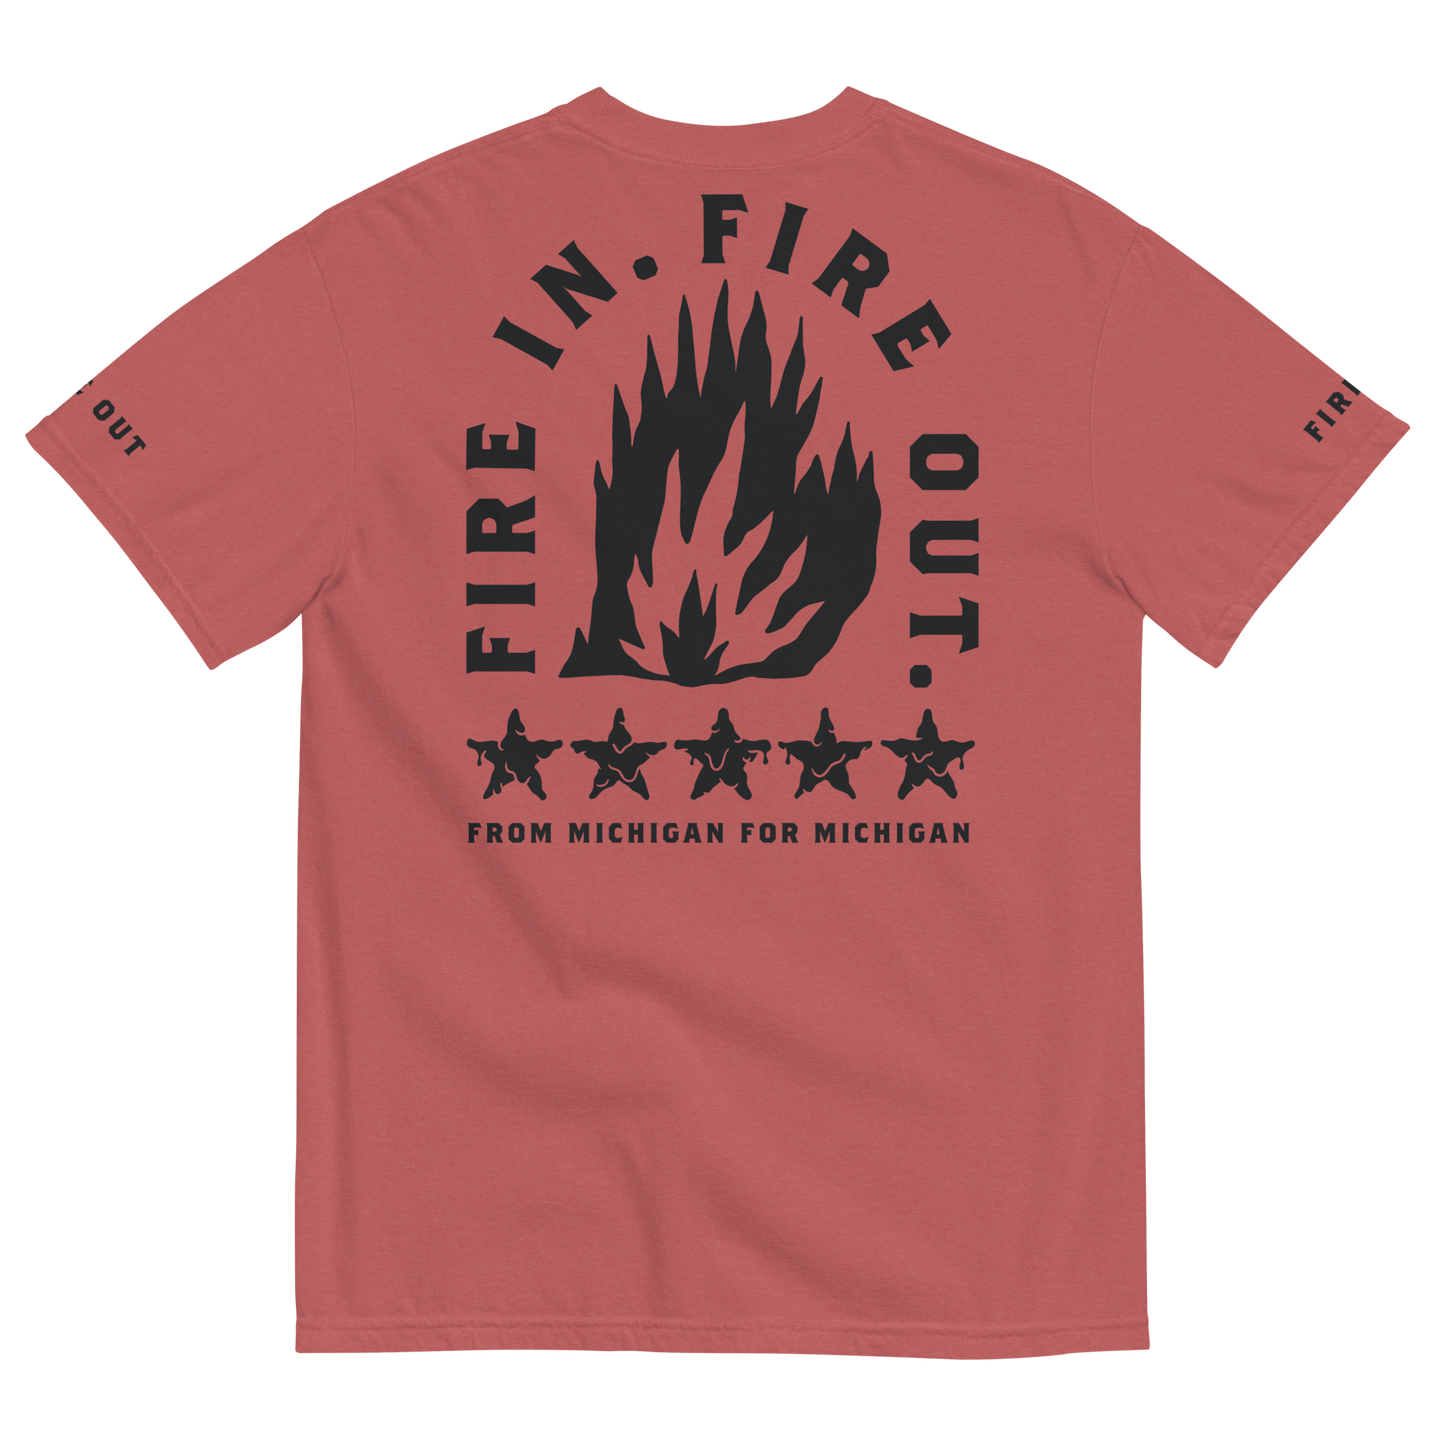 Fire In. Fire Out. Five Star Extracts Tee